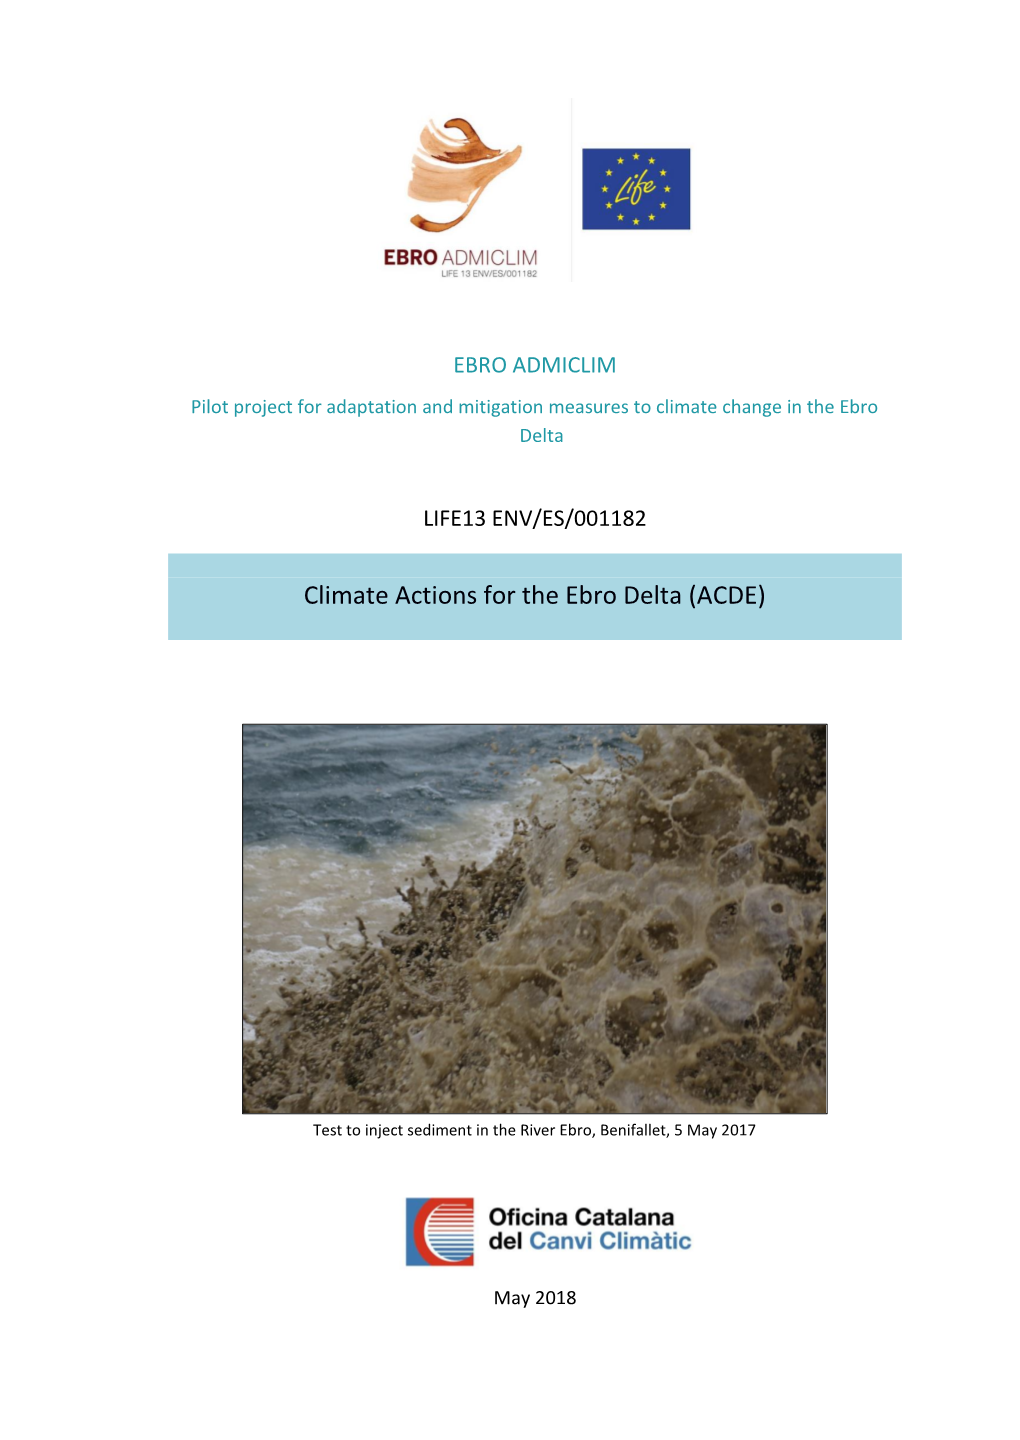 Climate Actions for the Ebro Delta (ACDE)